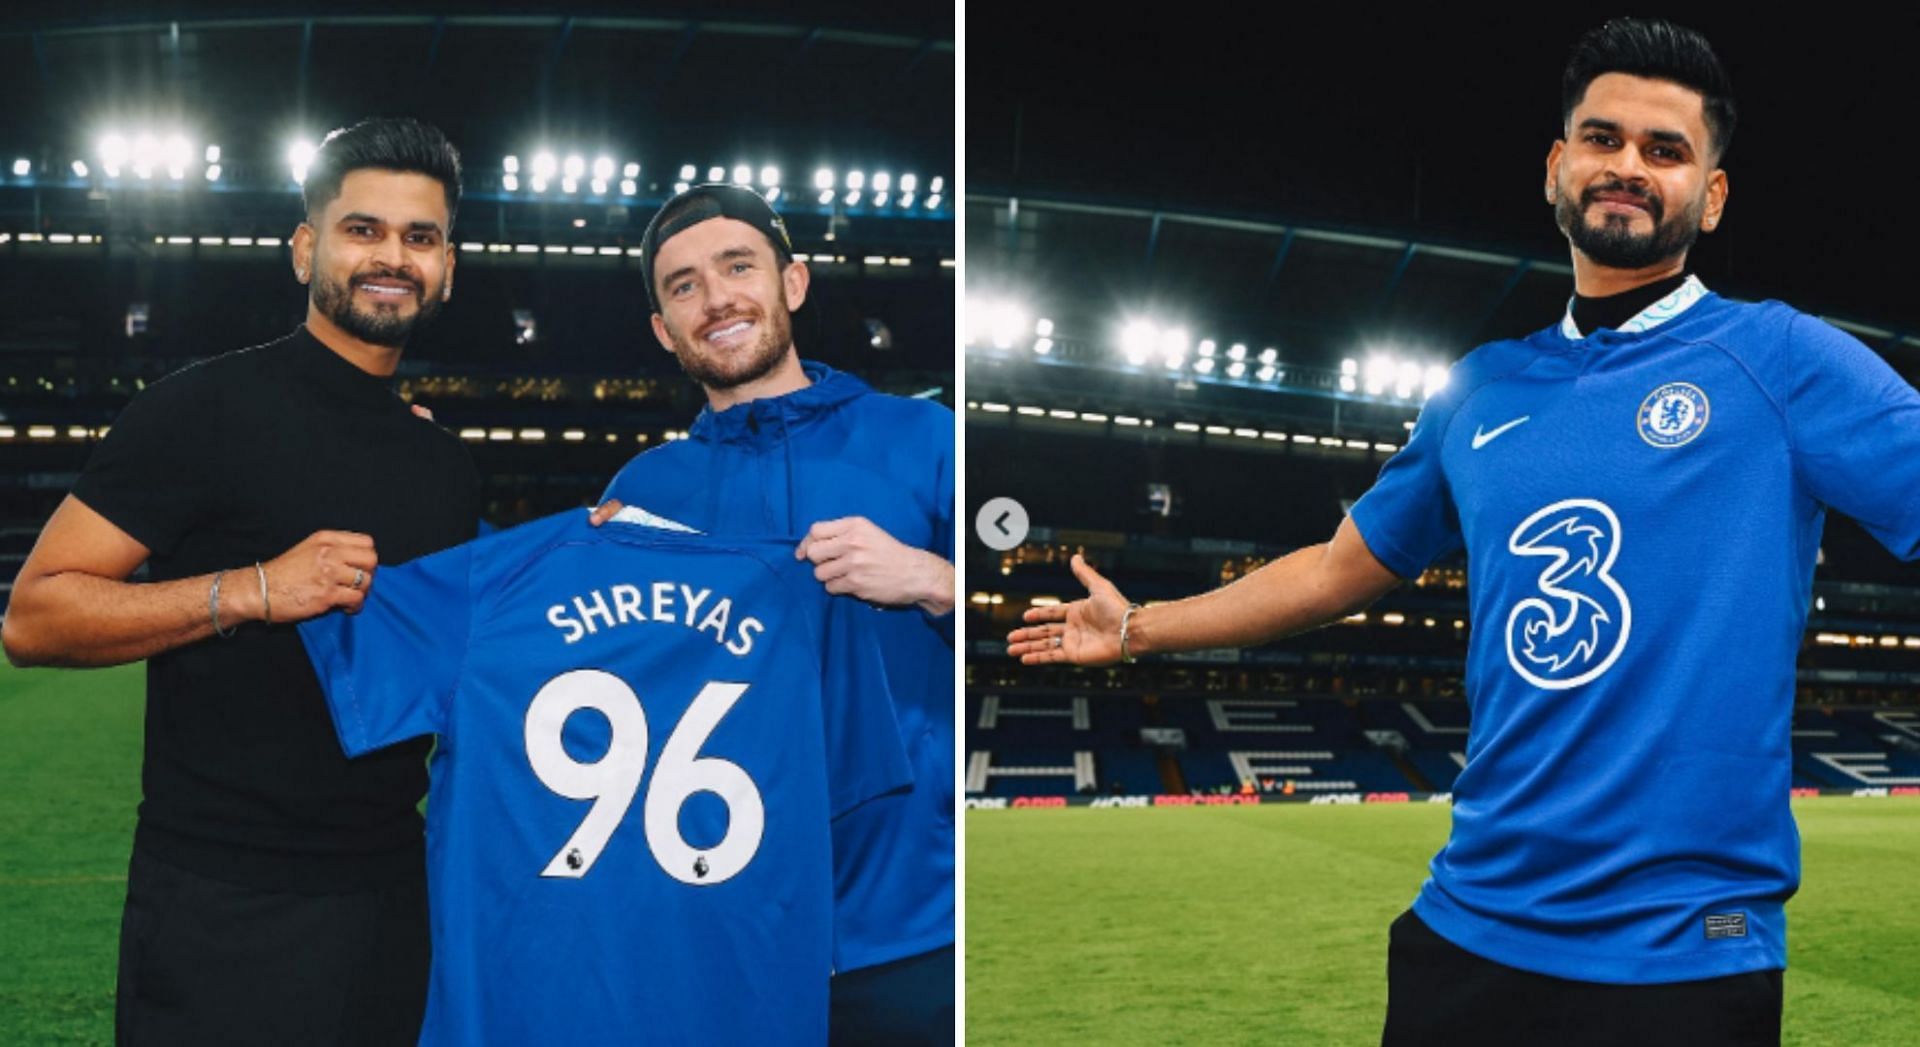 Chelsea left-back Ben Chilwell gifts a jersey to Shreyas Iyer. 📸: Chelsea  . . #ShreyasIyer #Chelsea #Cricket #Football #CricTracker